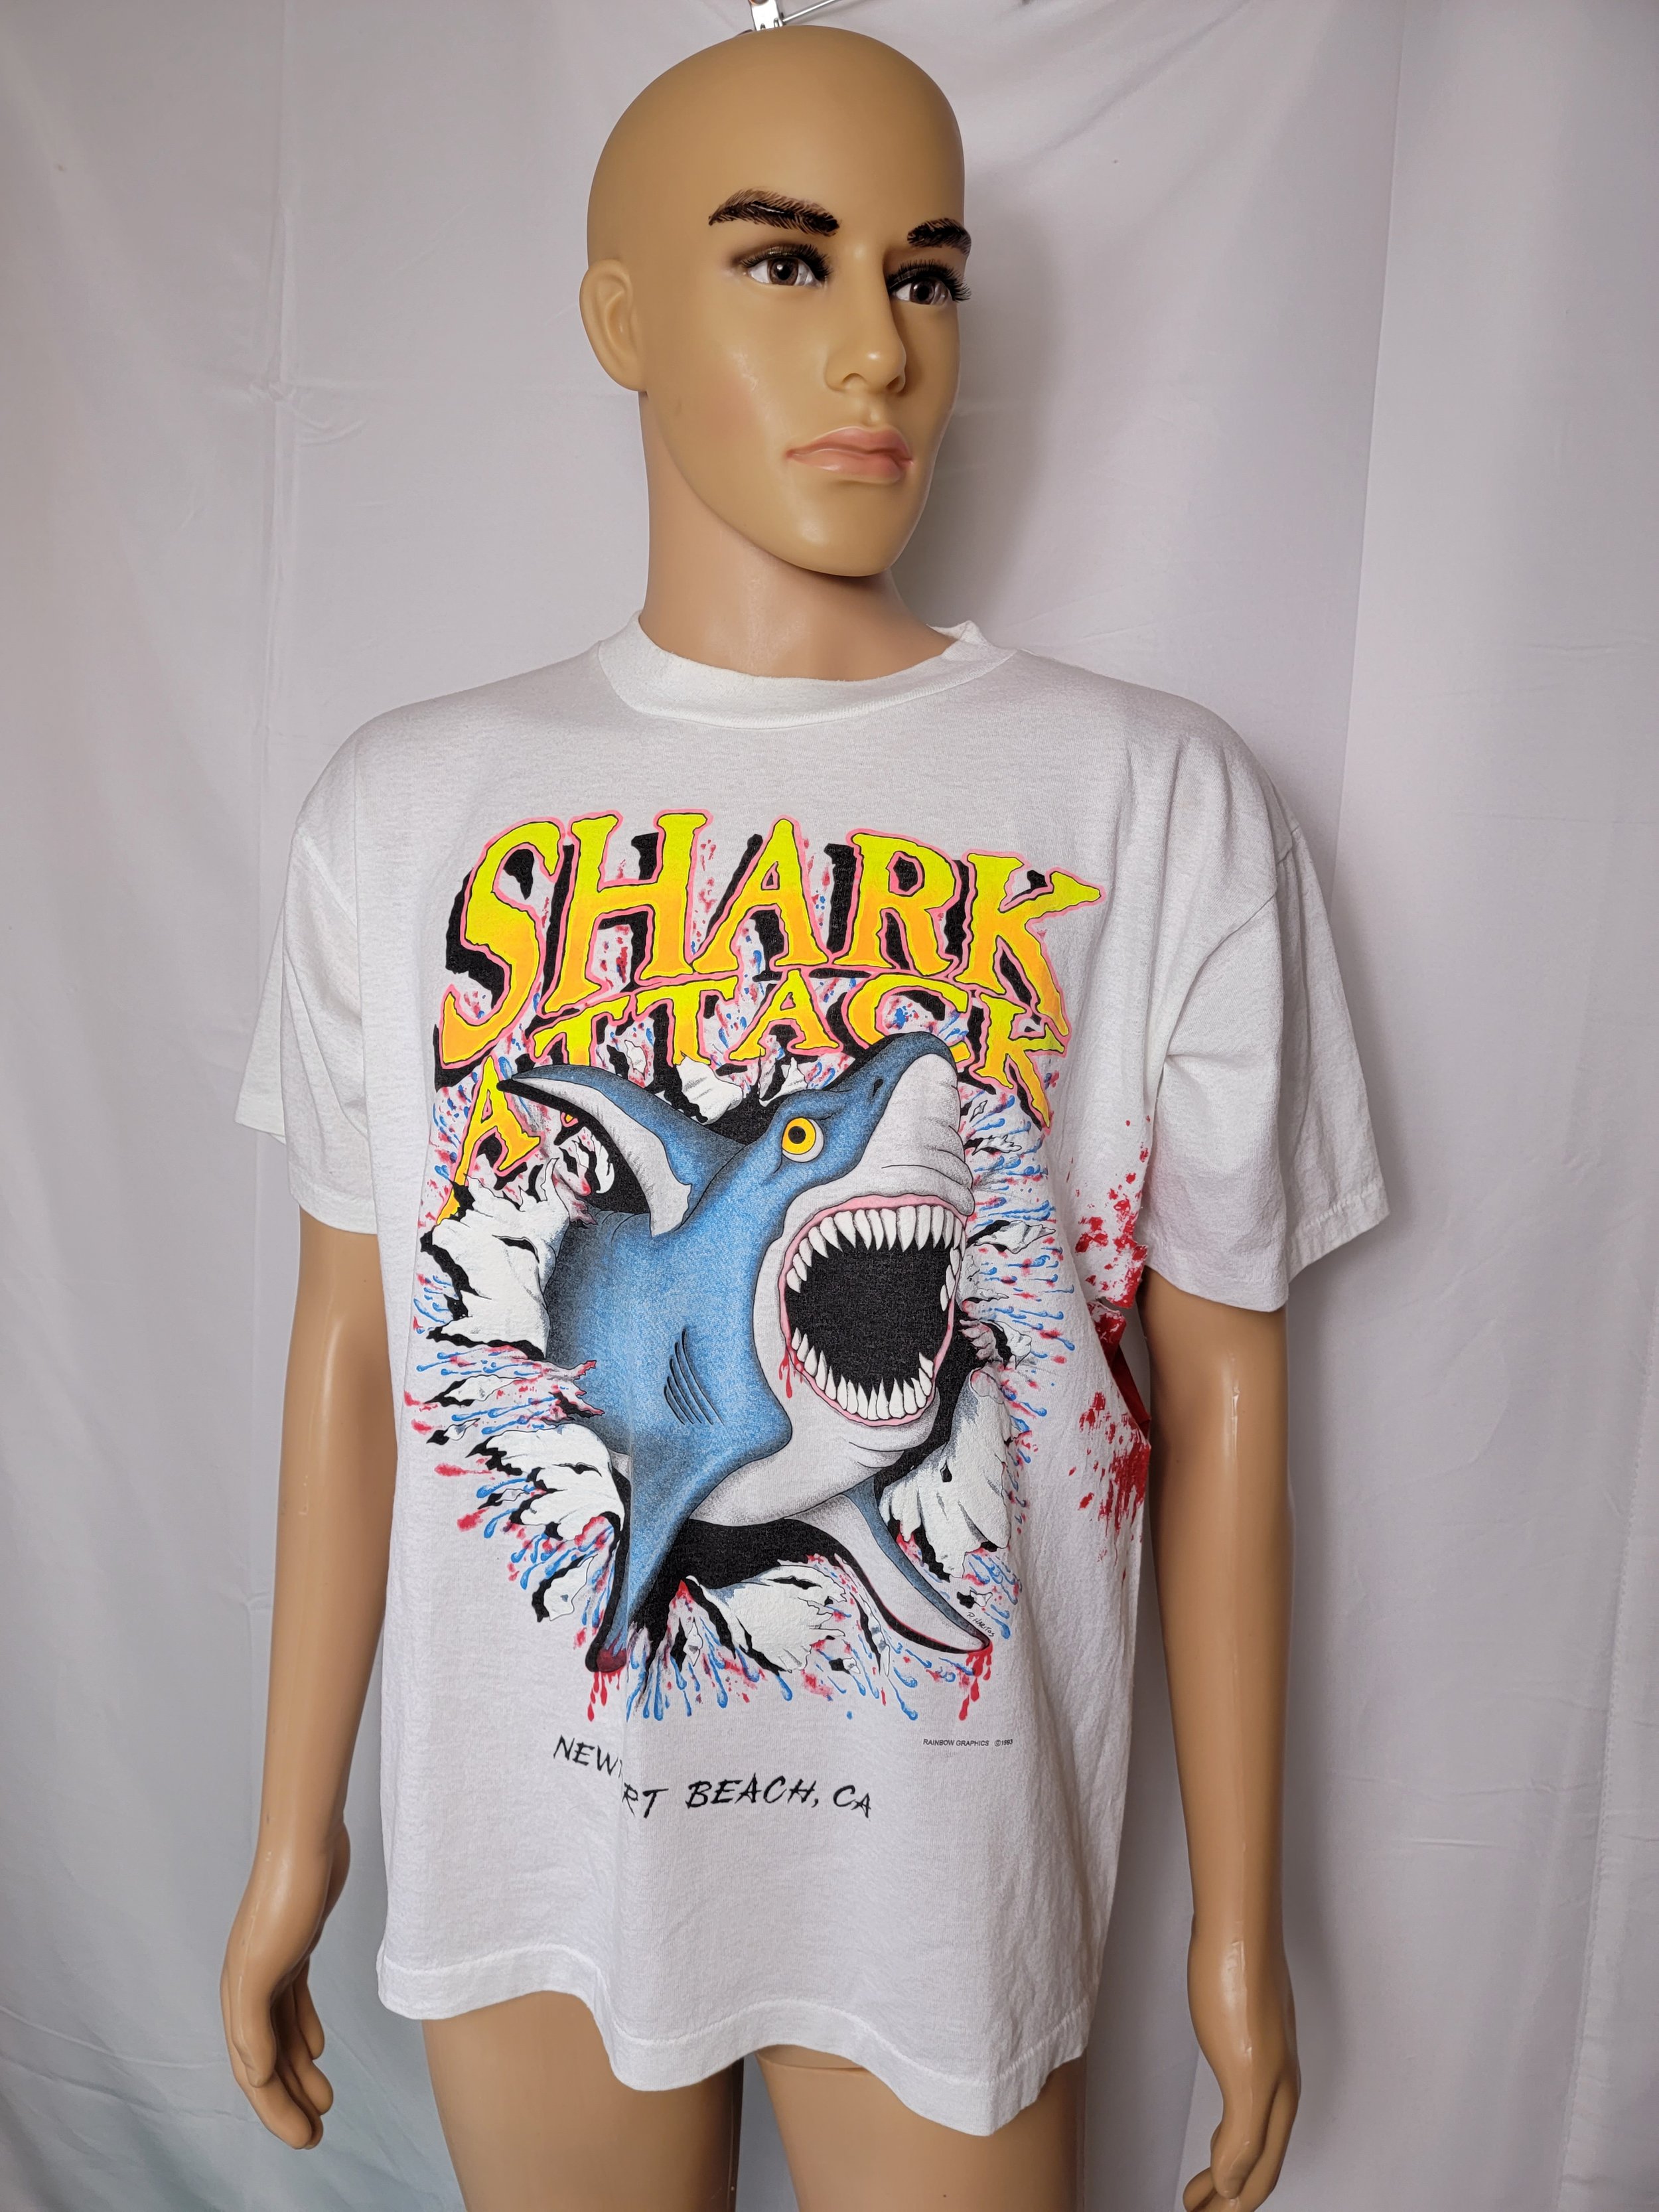 Vintage 1993 shark attack double sided single stitch tee shirt